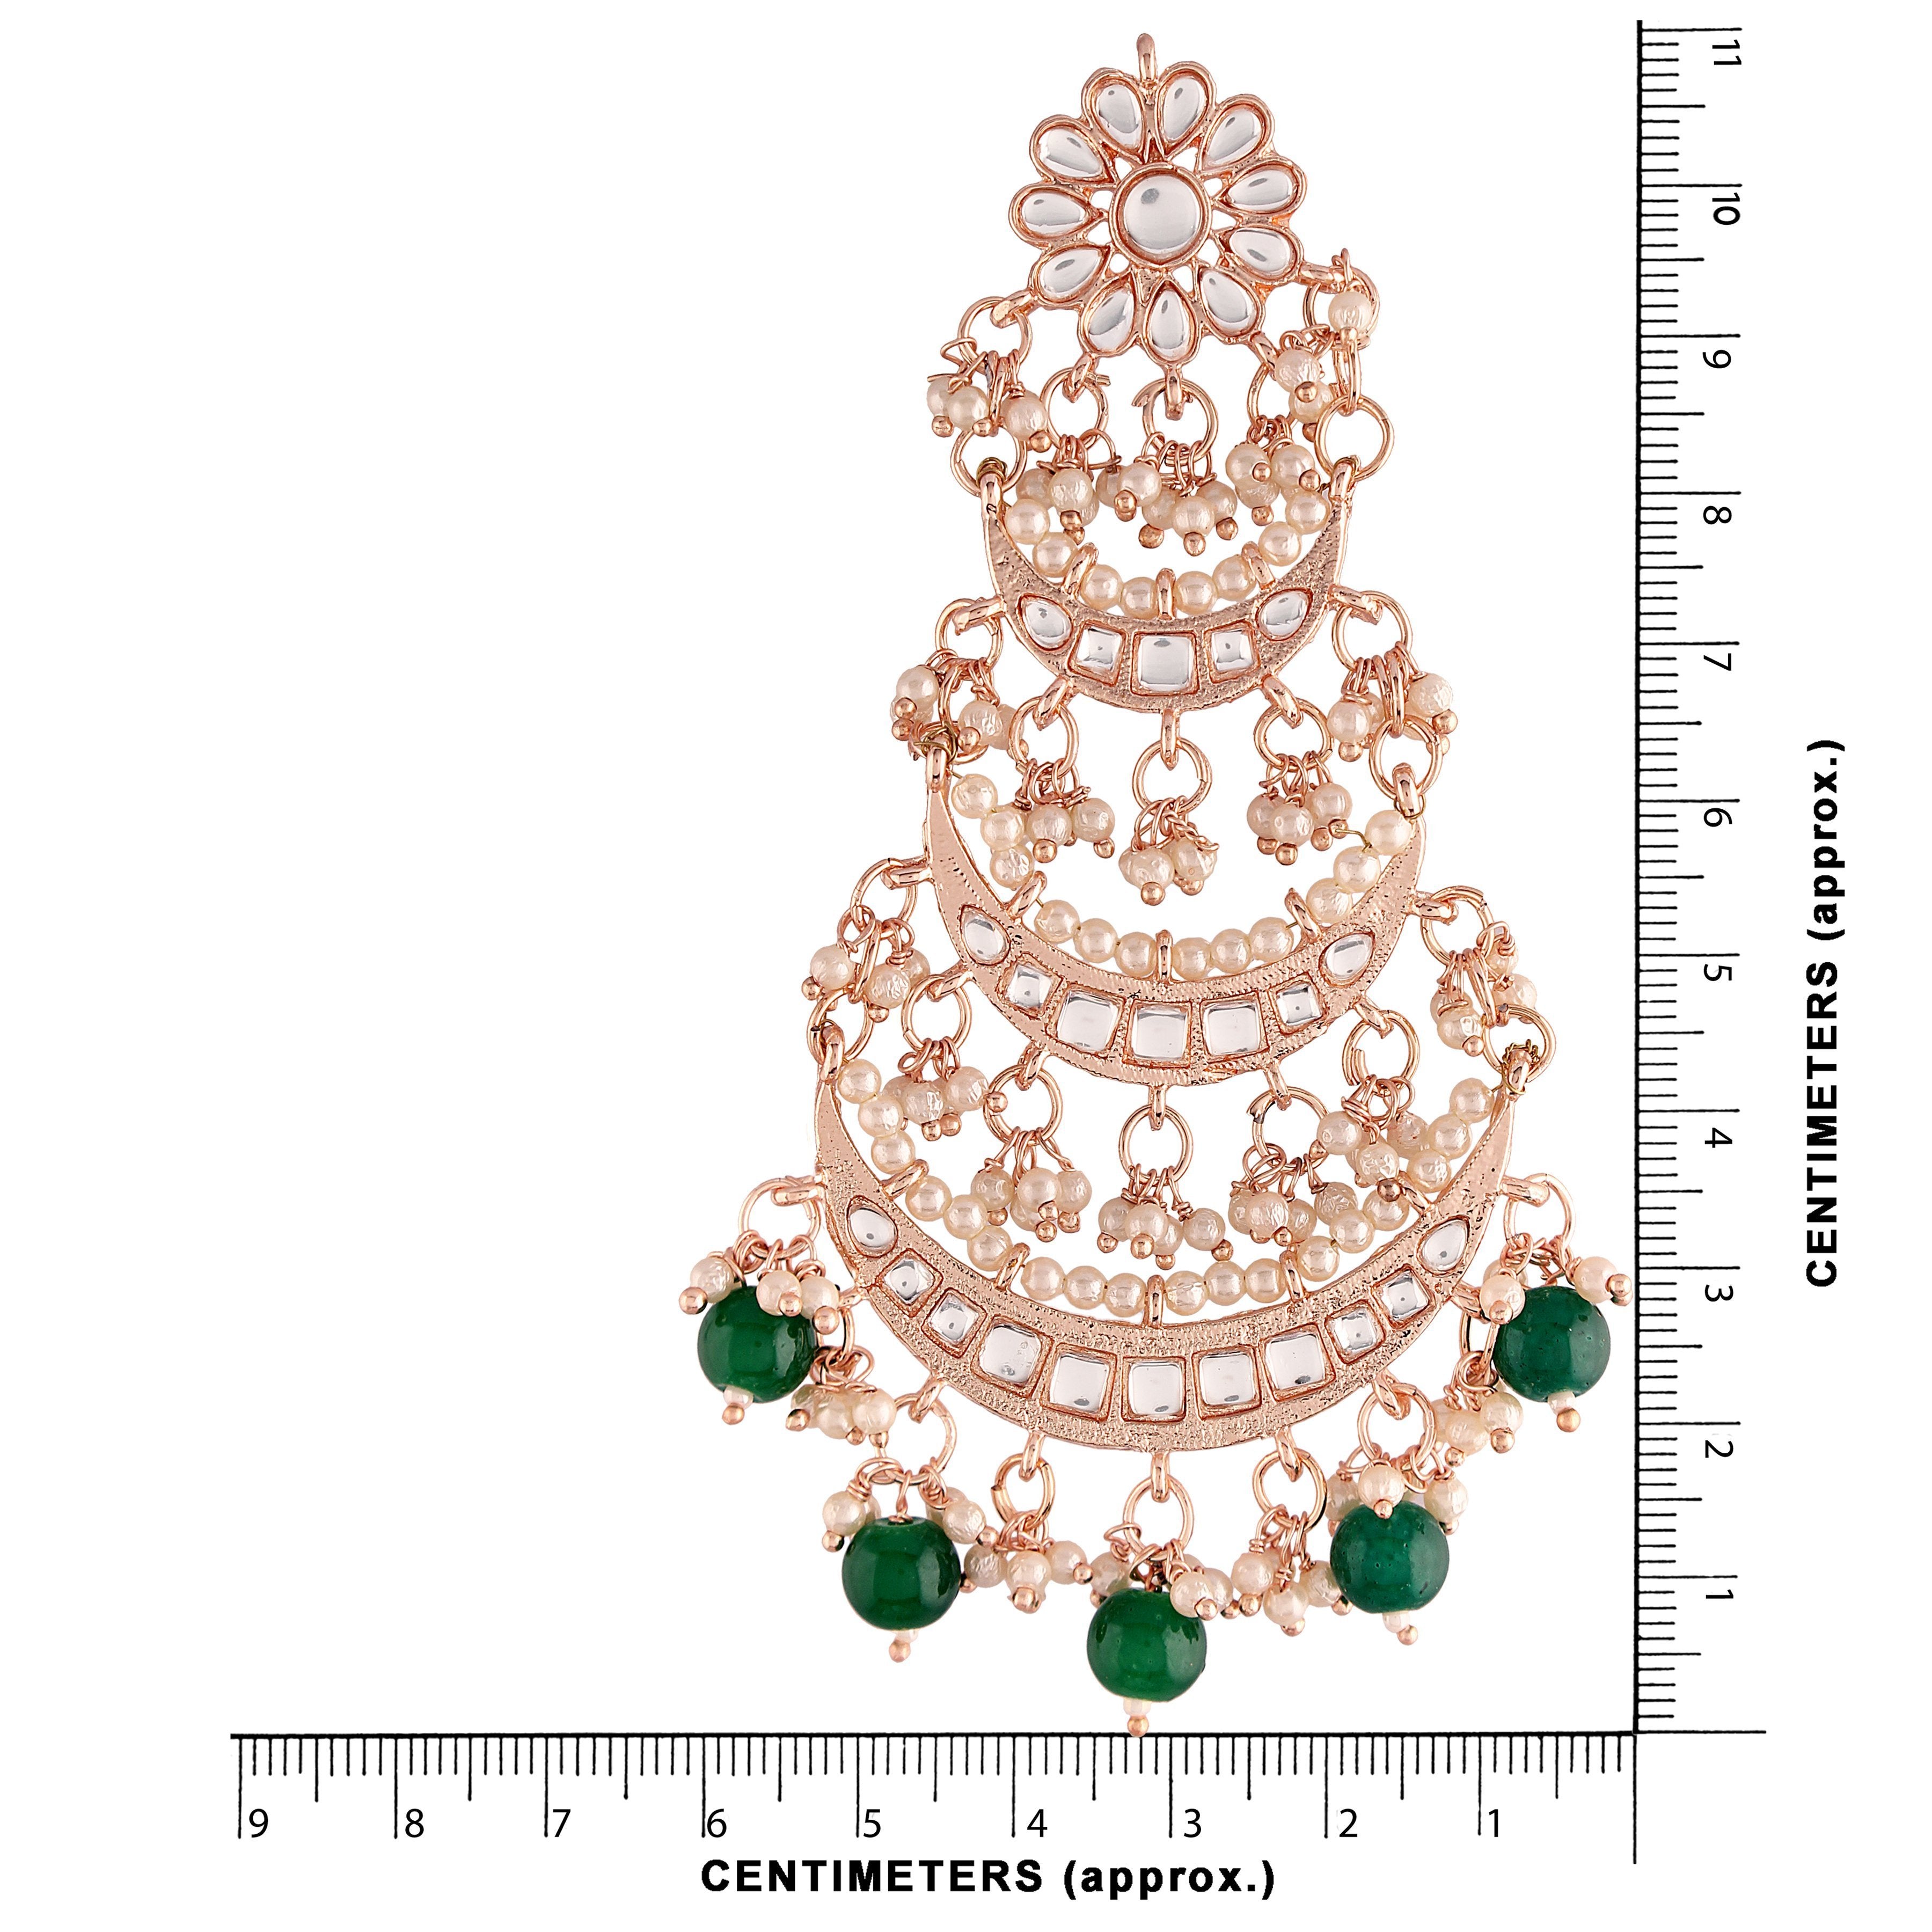 Women's  Rose Gold Plated 3 Layered Beaded Chandbali Earrings With Kundan And Pearl Work - i jewels